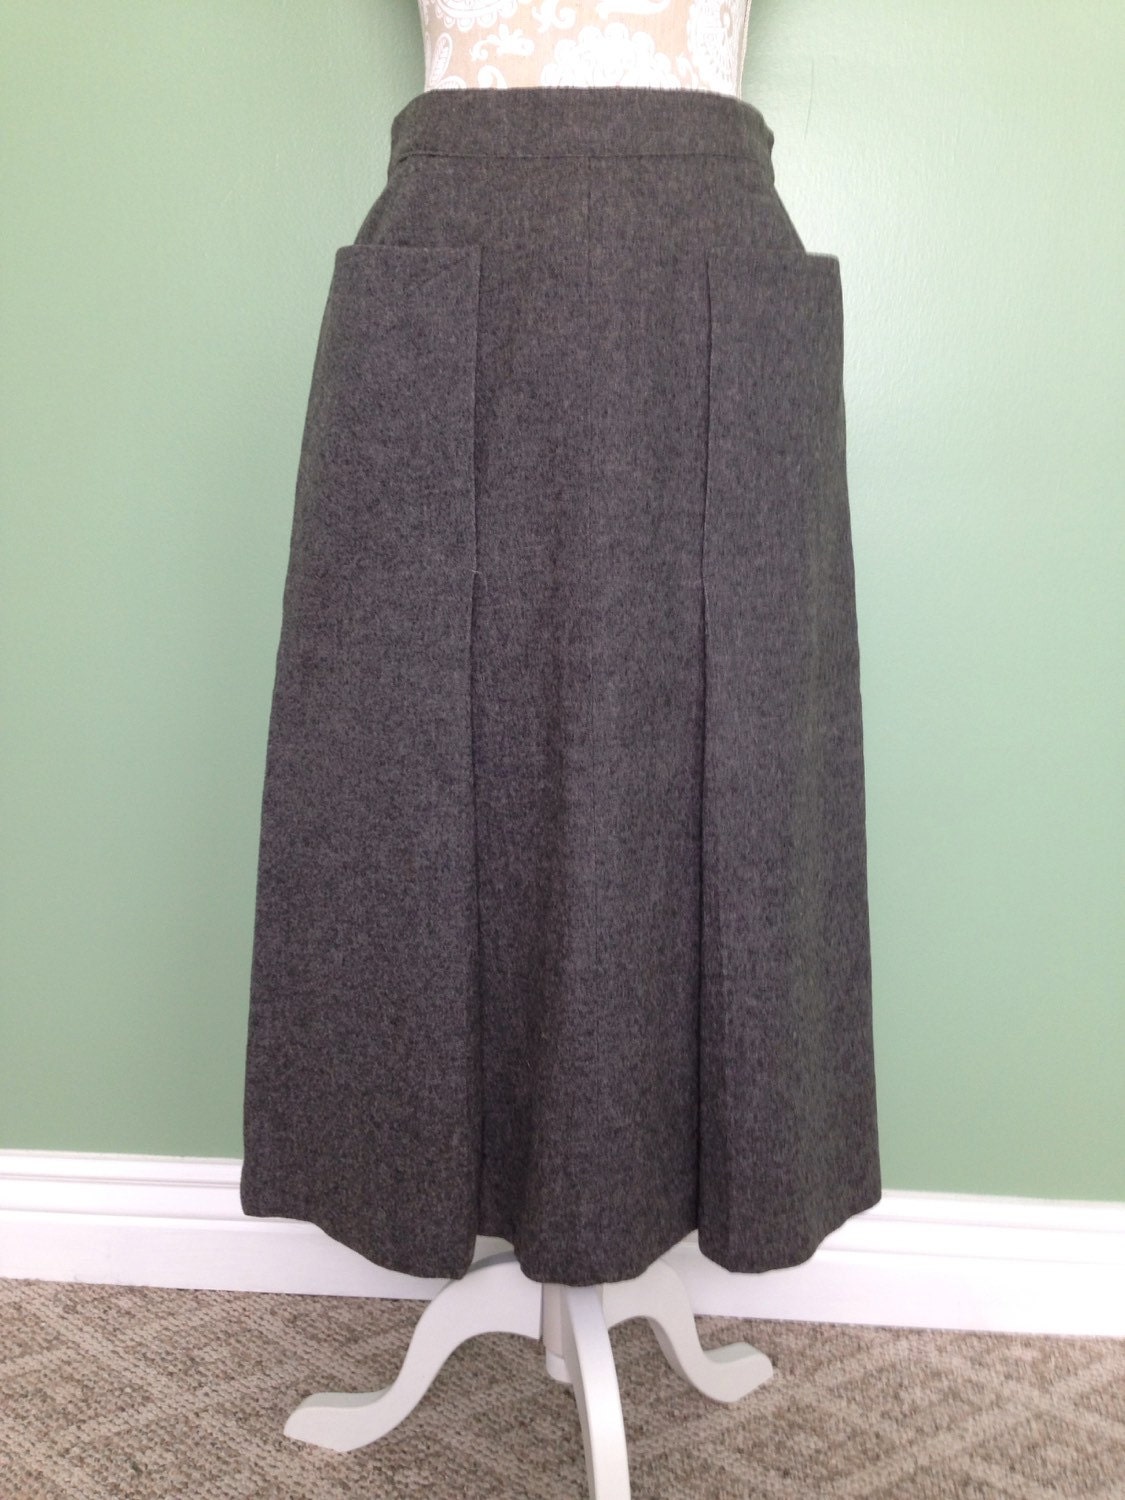 1950's Wool Women's Skirt with Front Kick Pleat in